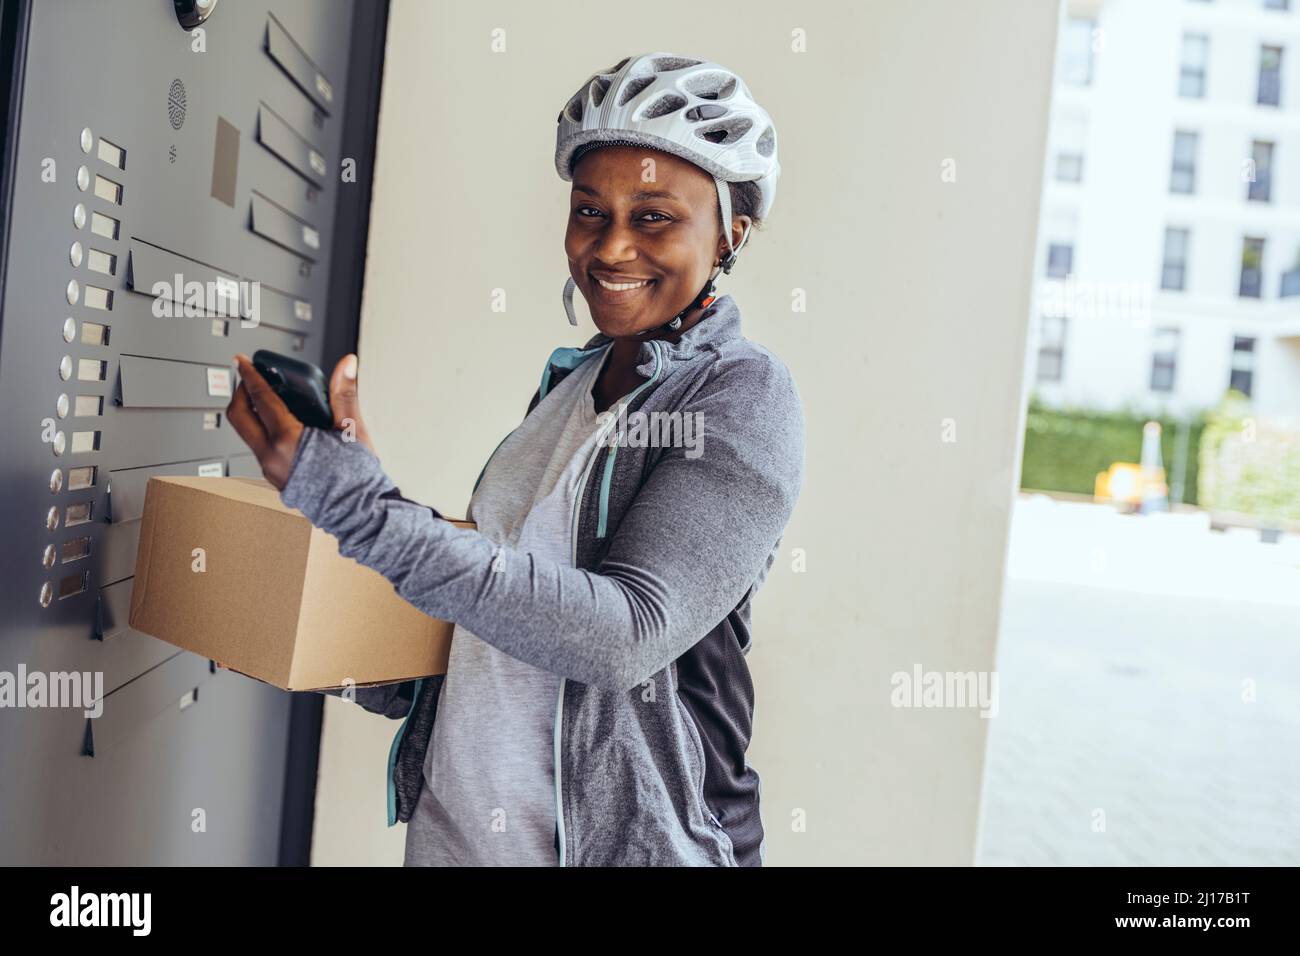 Smiling delivery woman with package box at entrance door Stock Photo